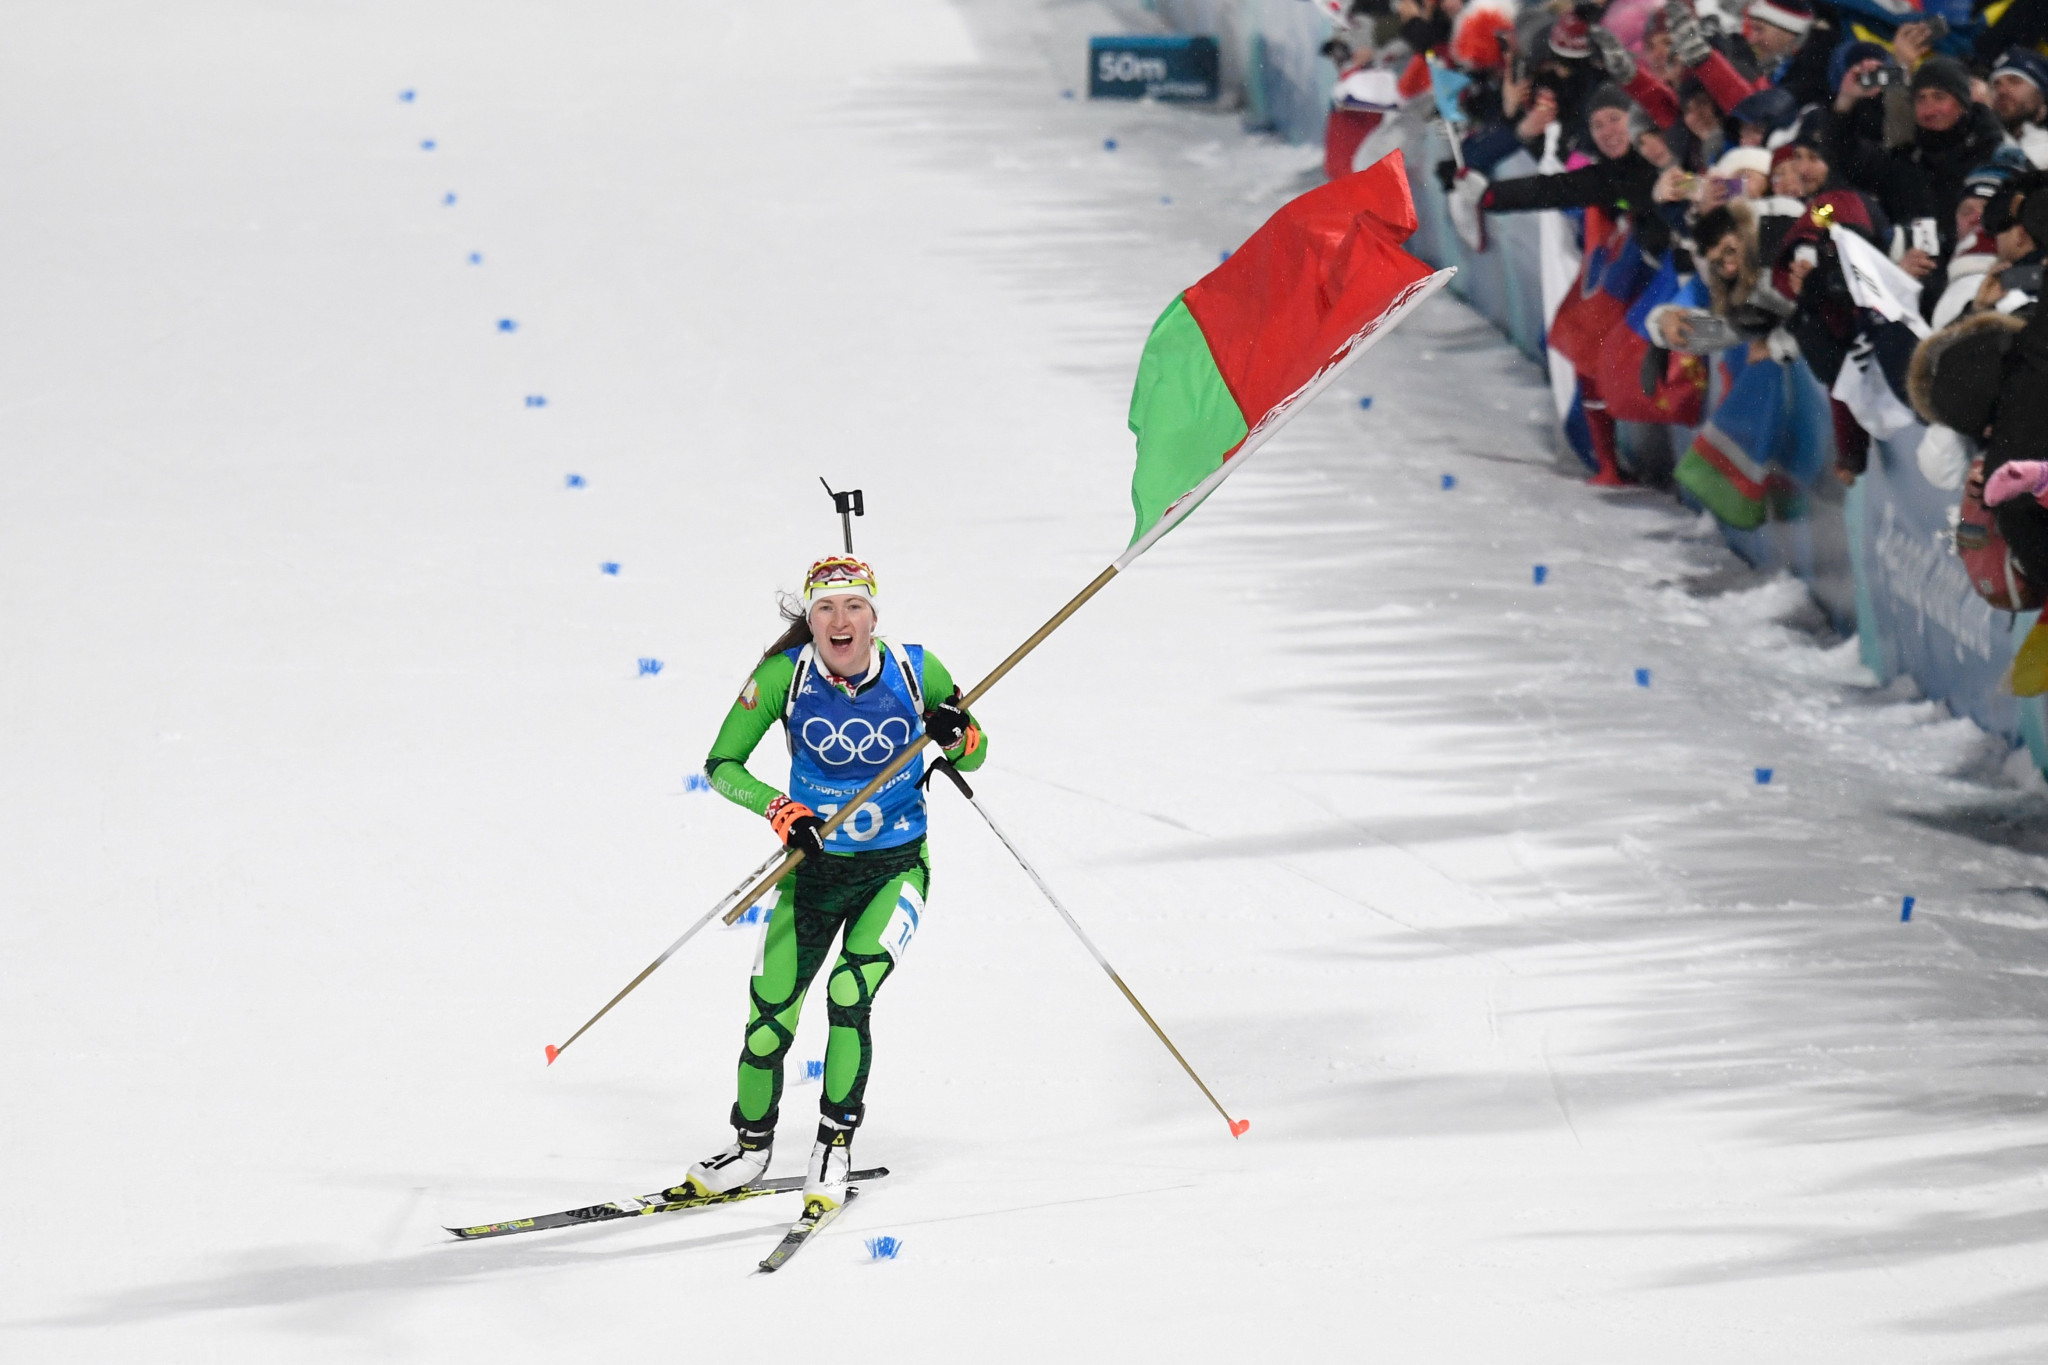 The last gold medal of the day was won by Belarus as Darya Domracheva sealed success for the country in the women's 4x6km biathlon relay ©Getty Images